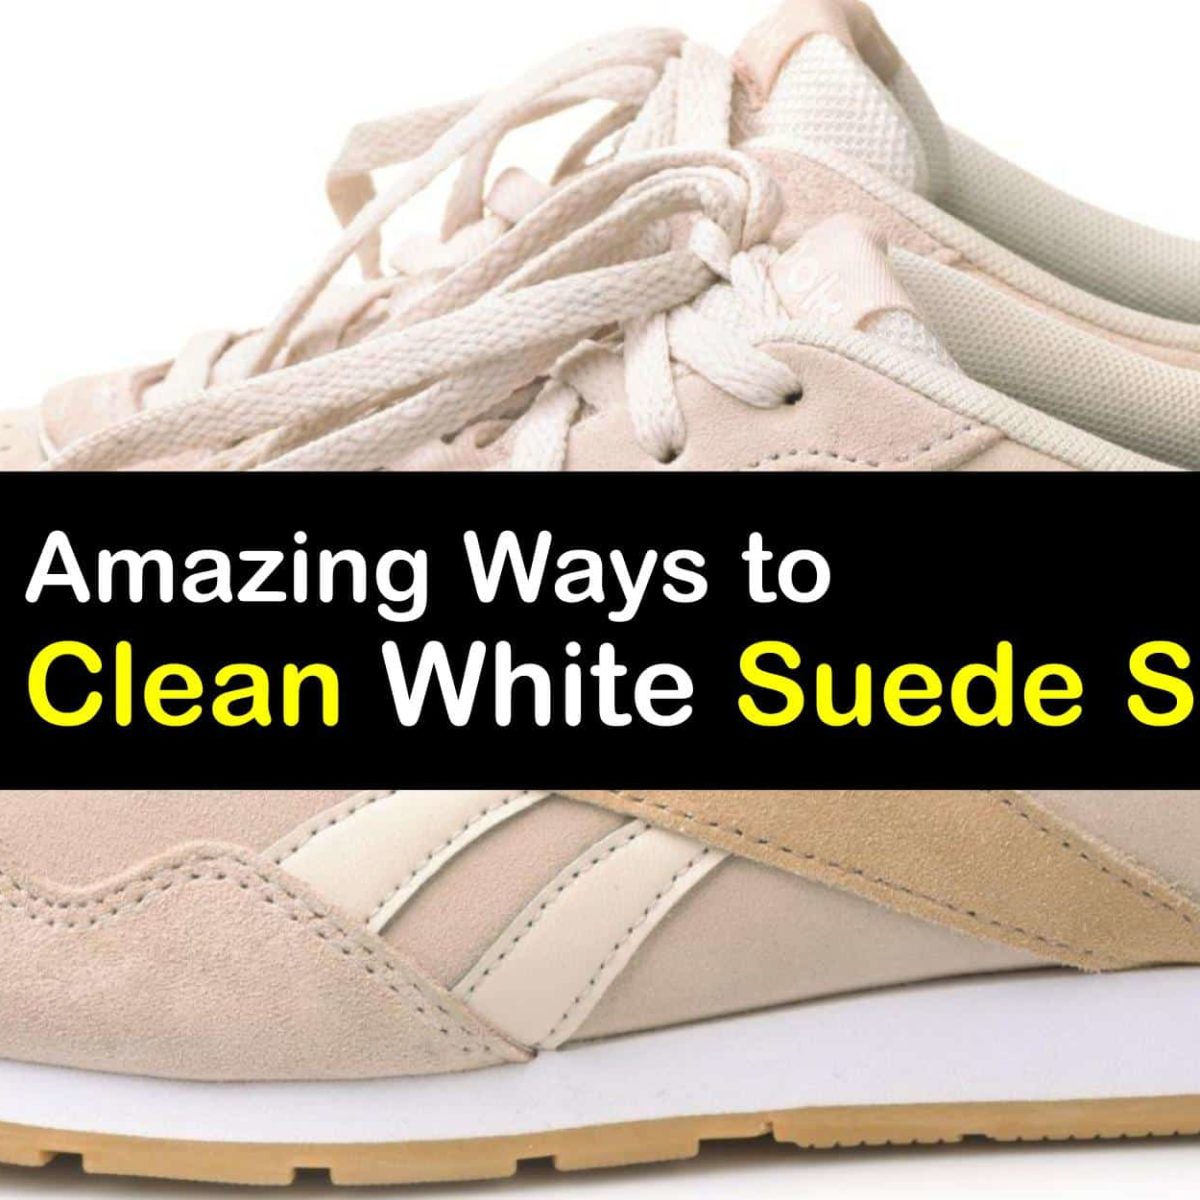 White Suede Shoe Care - Easy Ways to Clean Suede